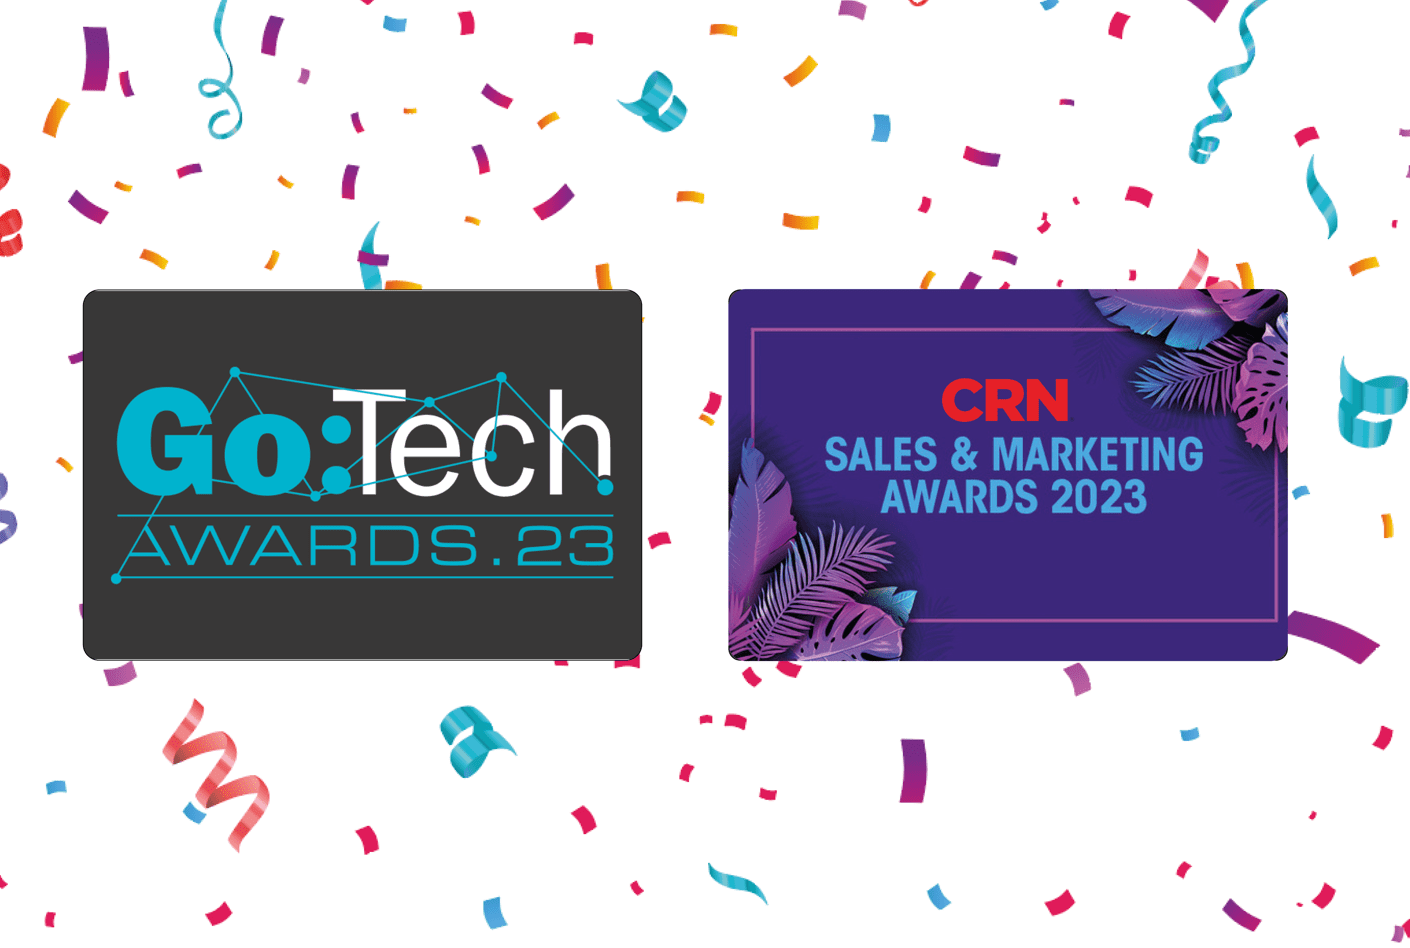 Double the Excitement: ComputerWorld Nominated for Two Prestigious Awards!